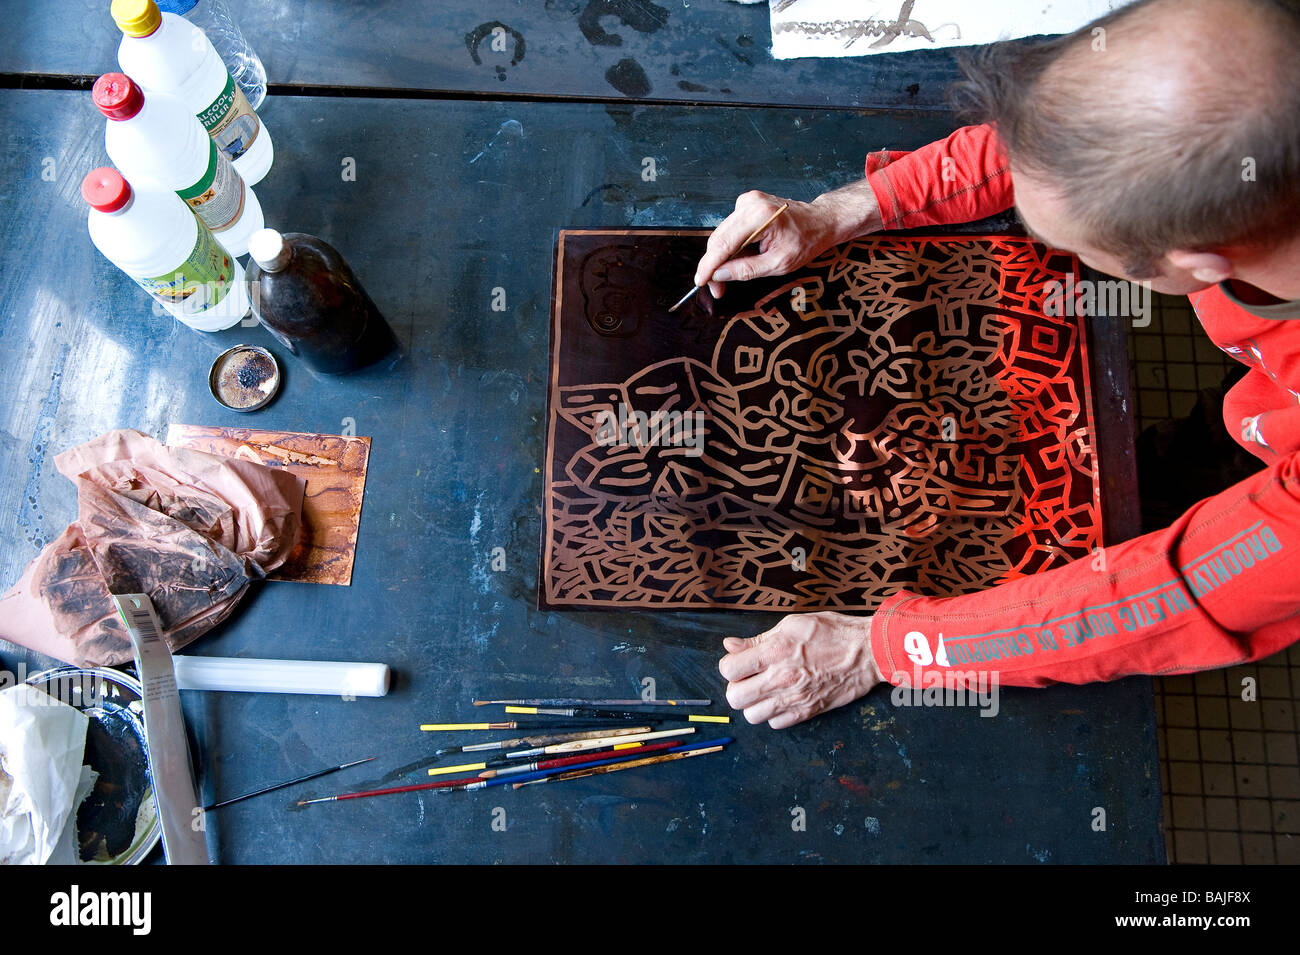 France, Yonne, Parly, the center of graphic art, artist Speedy Graphito in the lithography studio Stock Photo